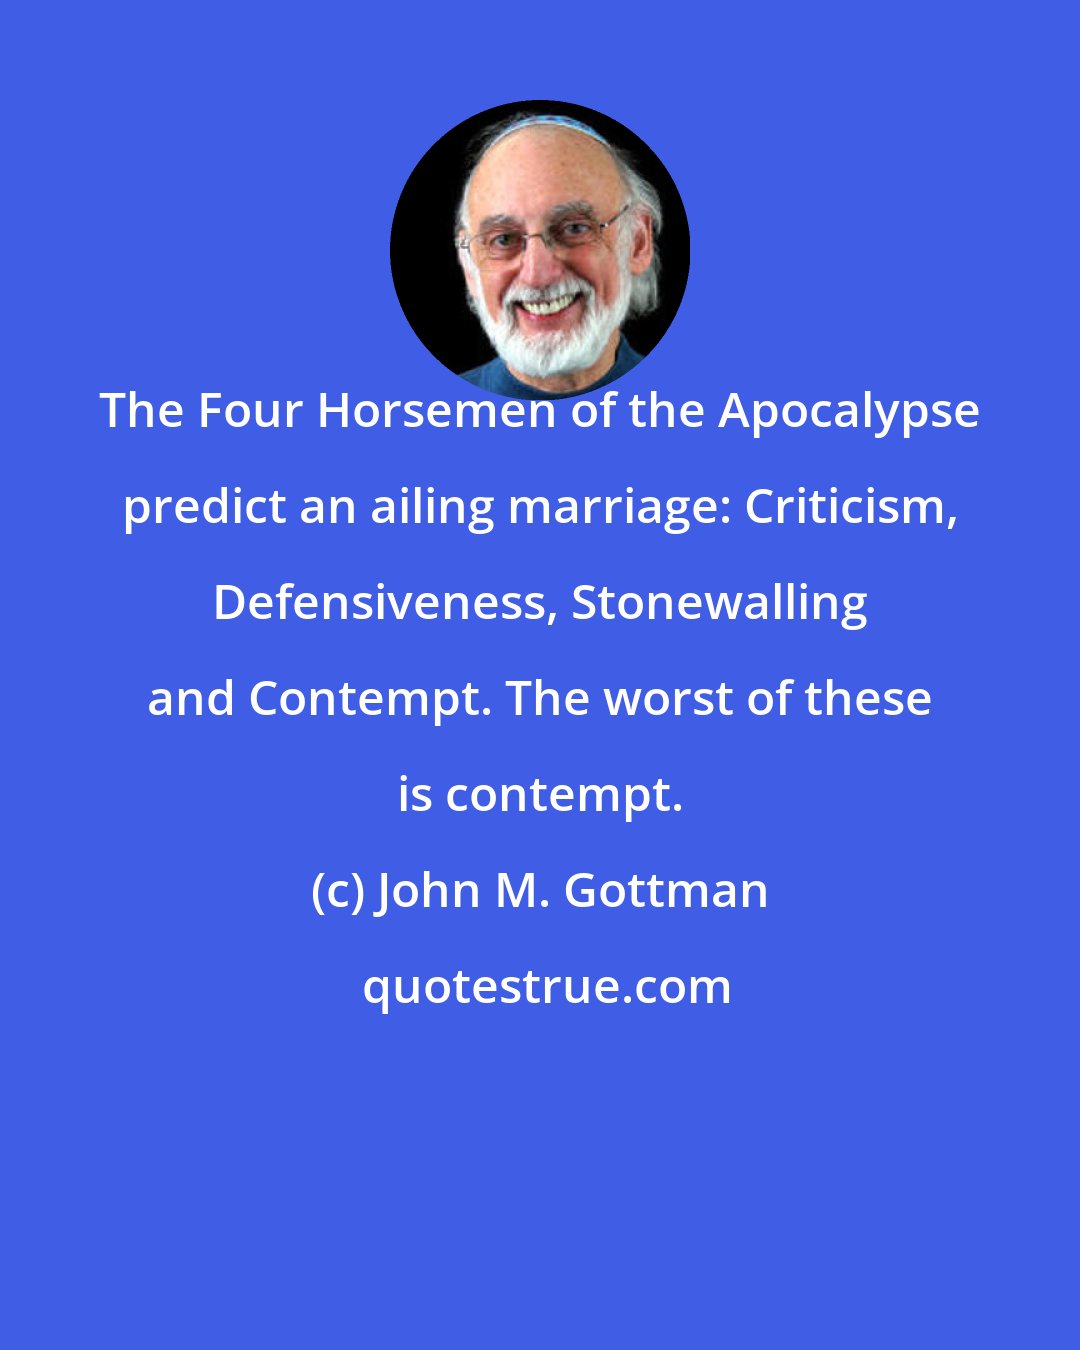 John M. Gottman: The Four Horsemen of the Apocalypse predict an ailing marriage: Criticism, Defensiveness, Stonewalling and Contempt. The worst of these is contempt.